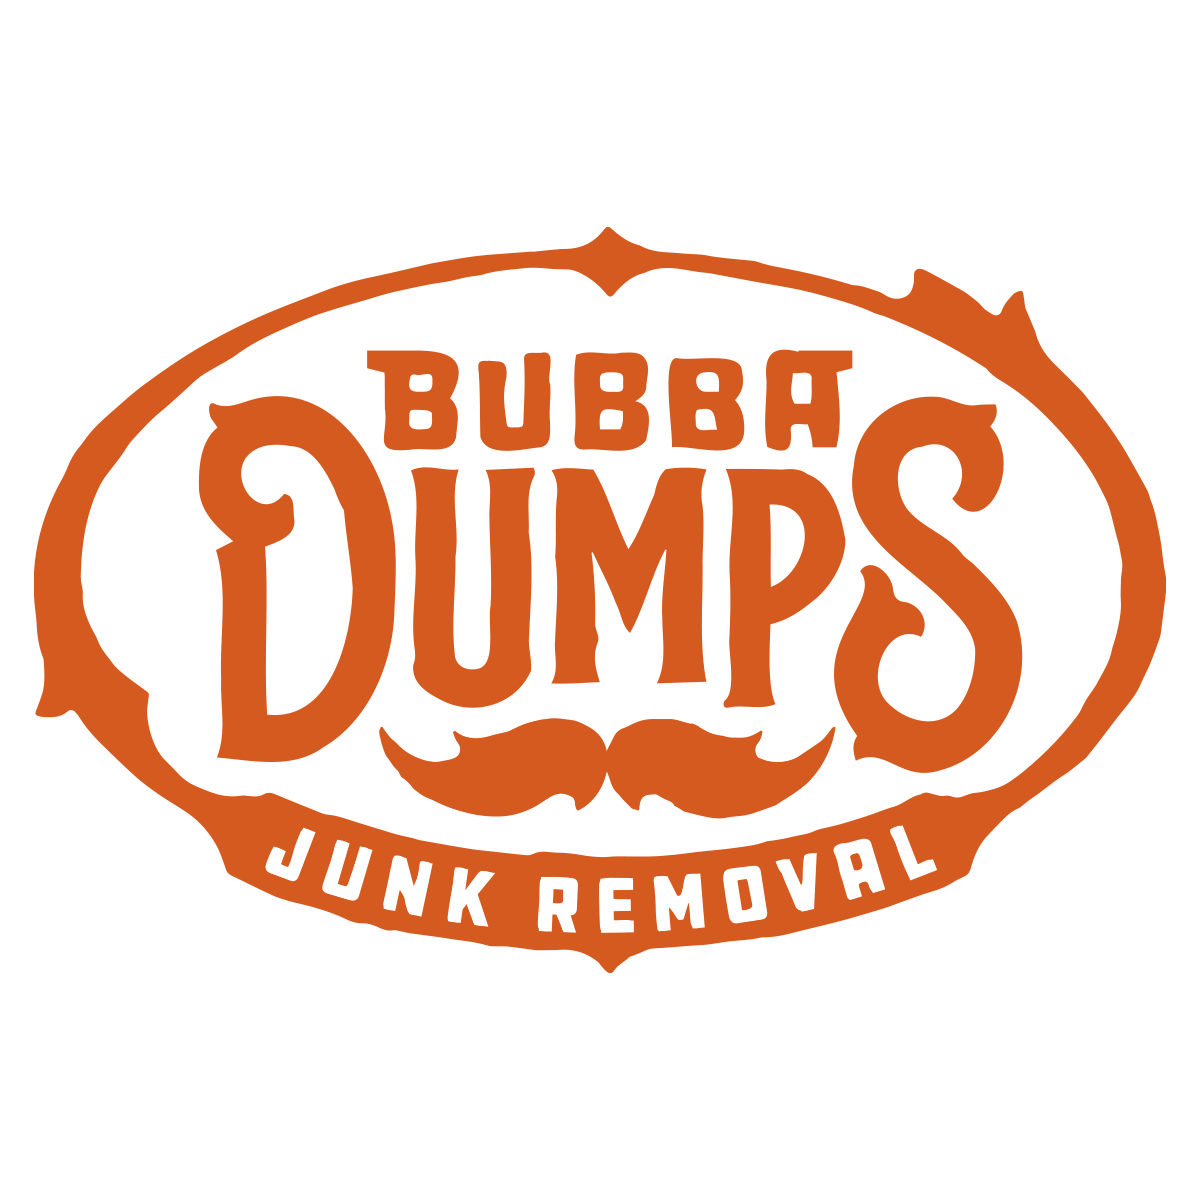 Bubba Dumps logo design by logo designer TrioSigns,Inc. for your inspiration and for the worlds largest logo competition